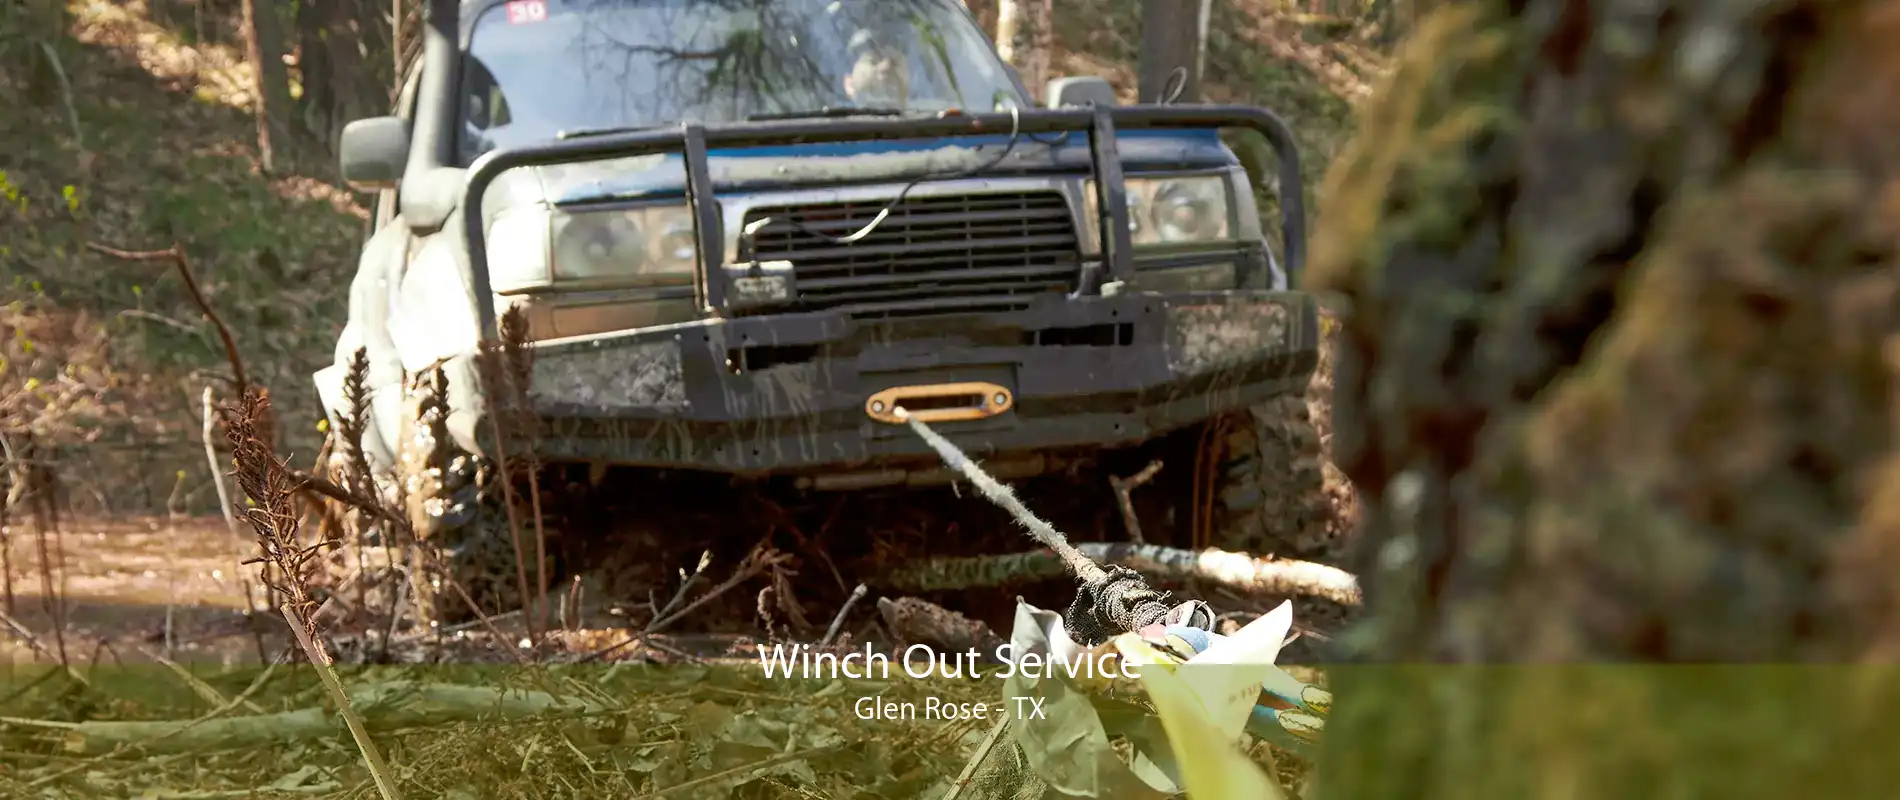 Winch Out Service Glen Rose - TX